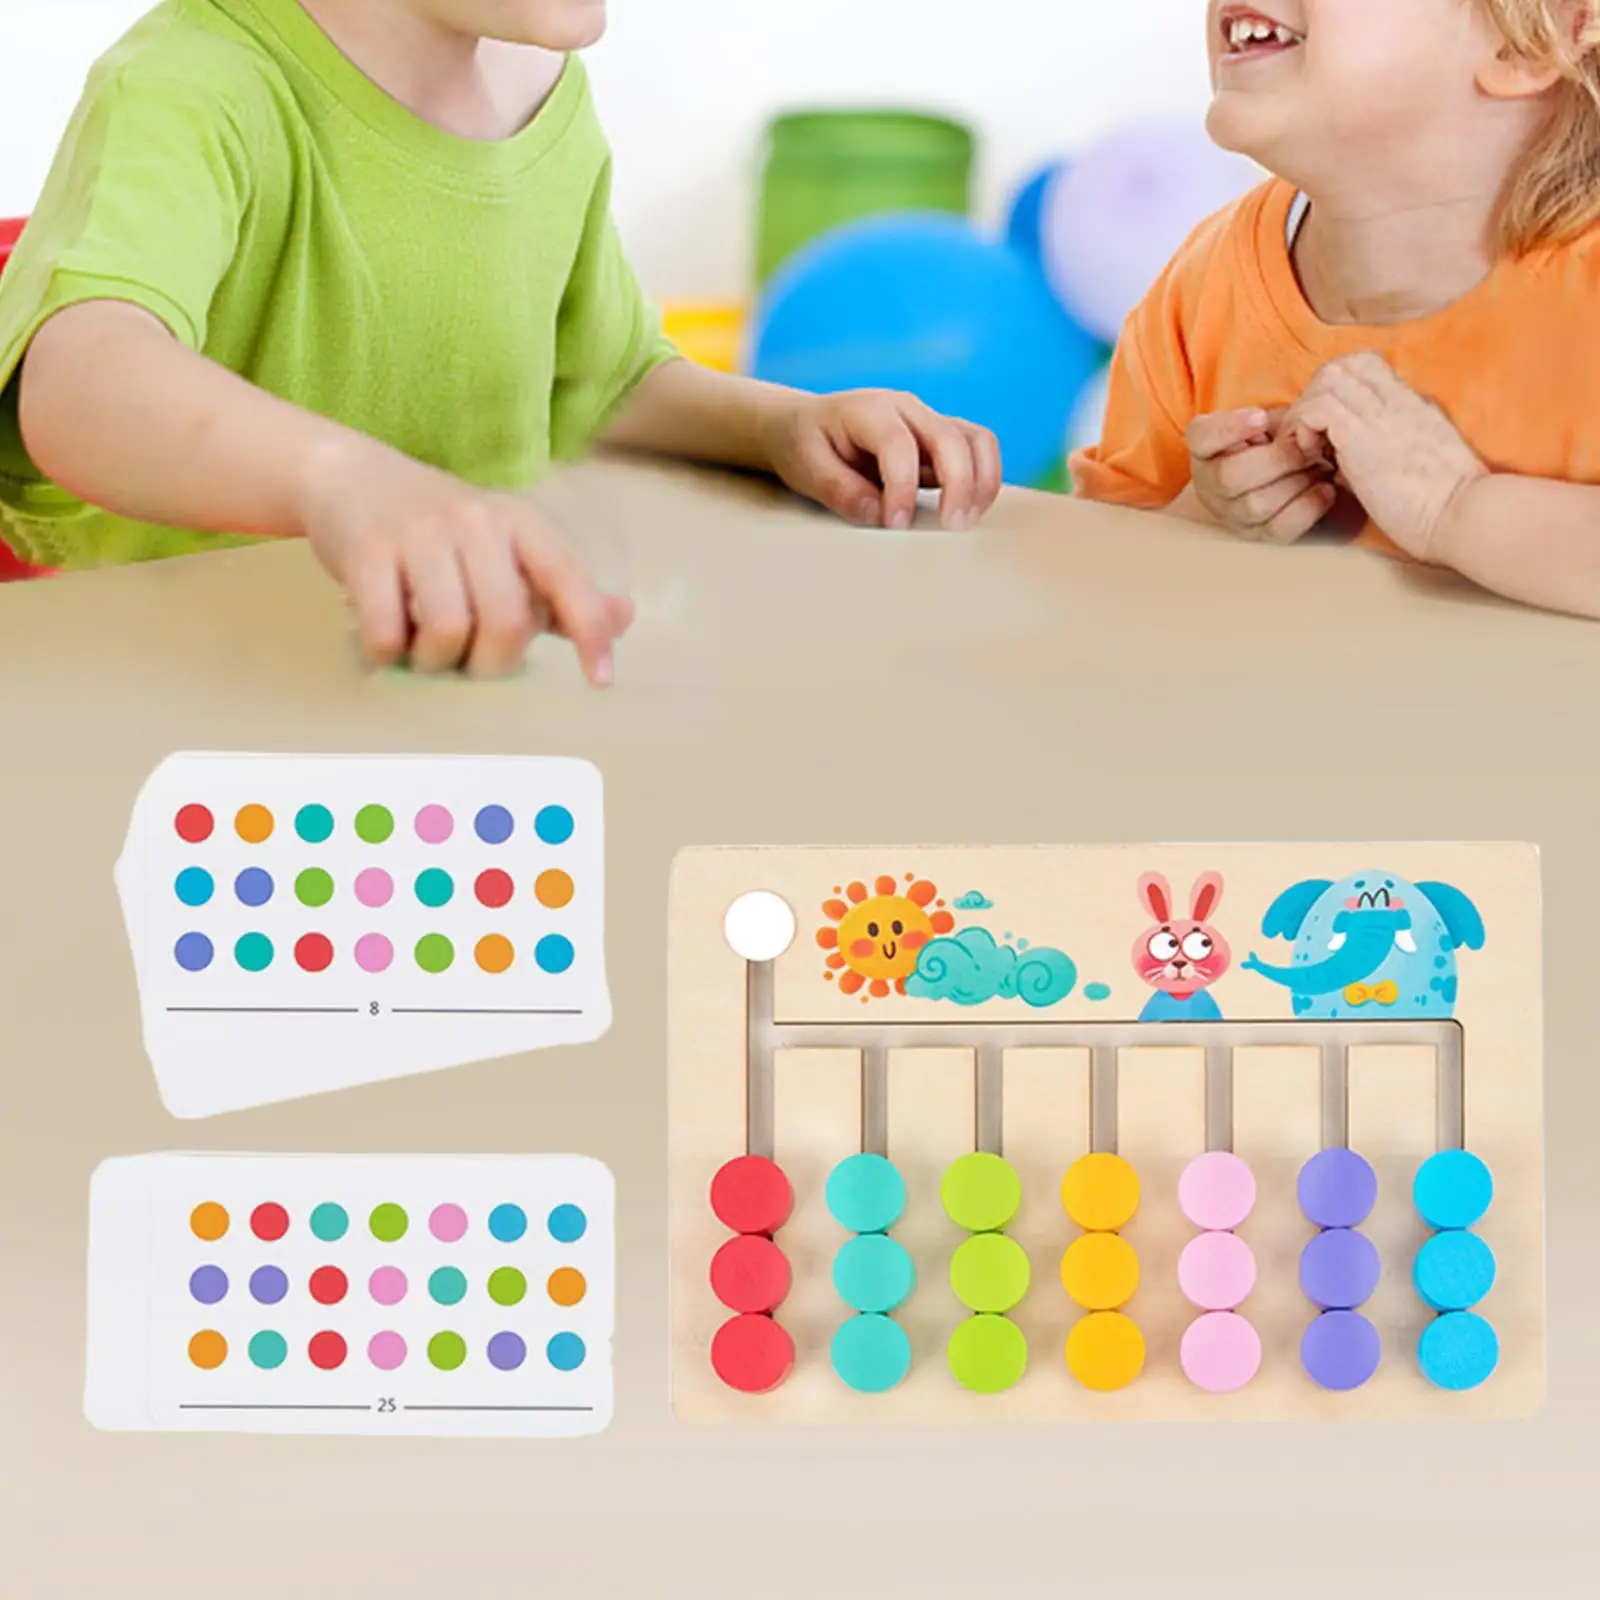 Montessori Toys Slide Puzzle Board Games Family Game Color and Shape Matching Brain Teasers Logic Game for Child Travel Toys